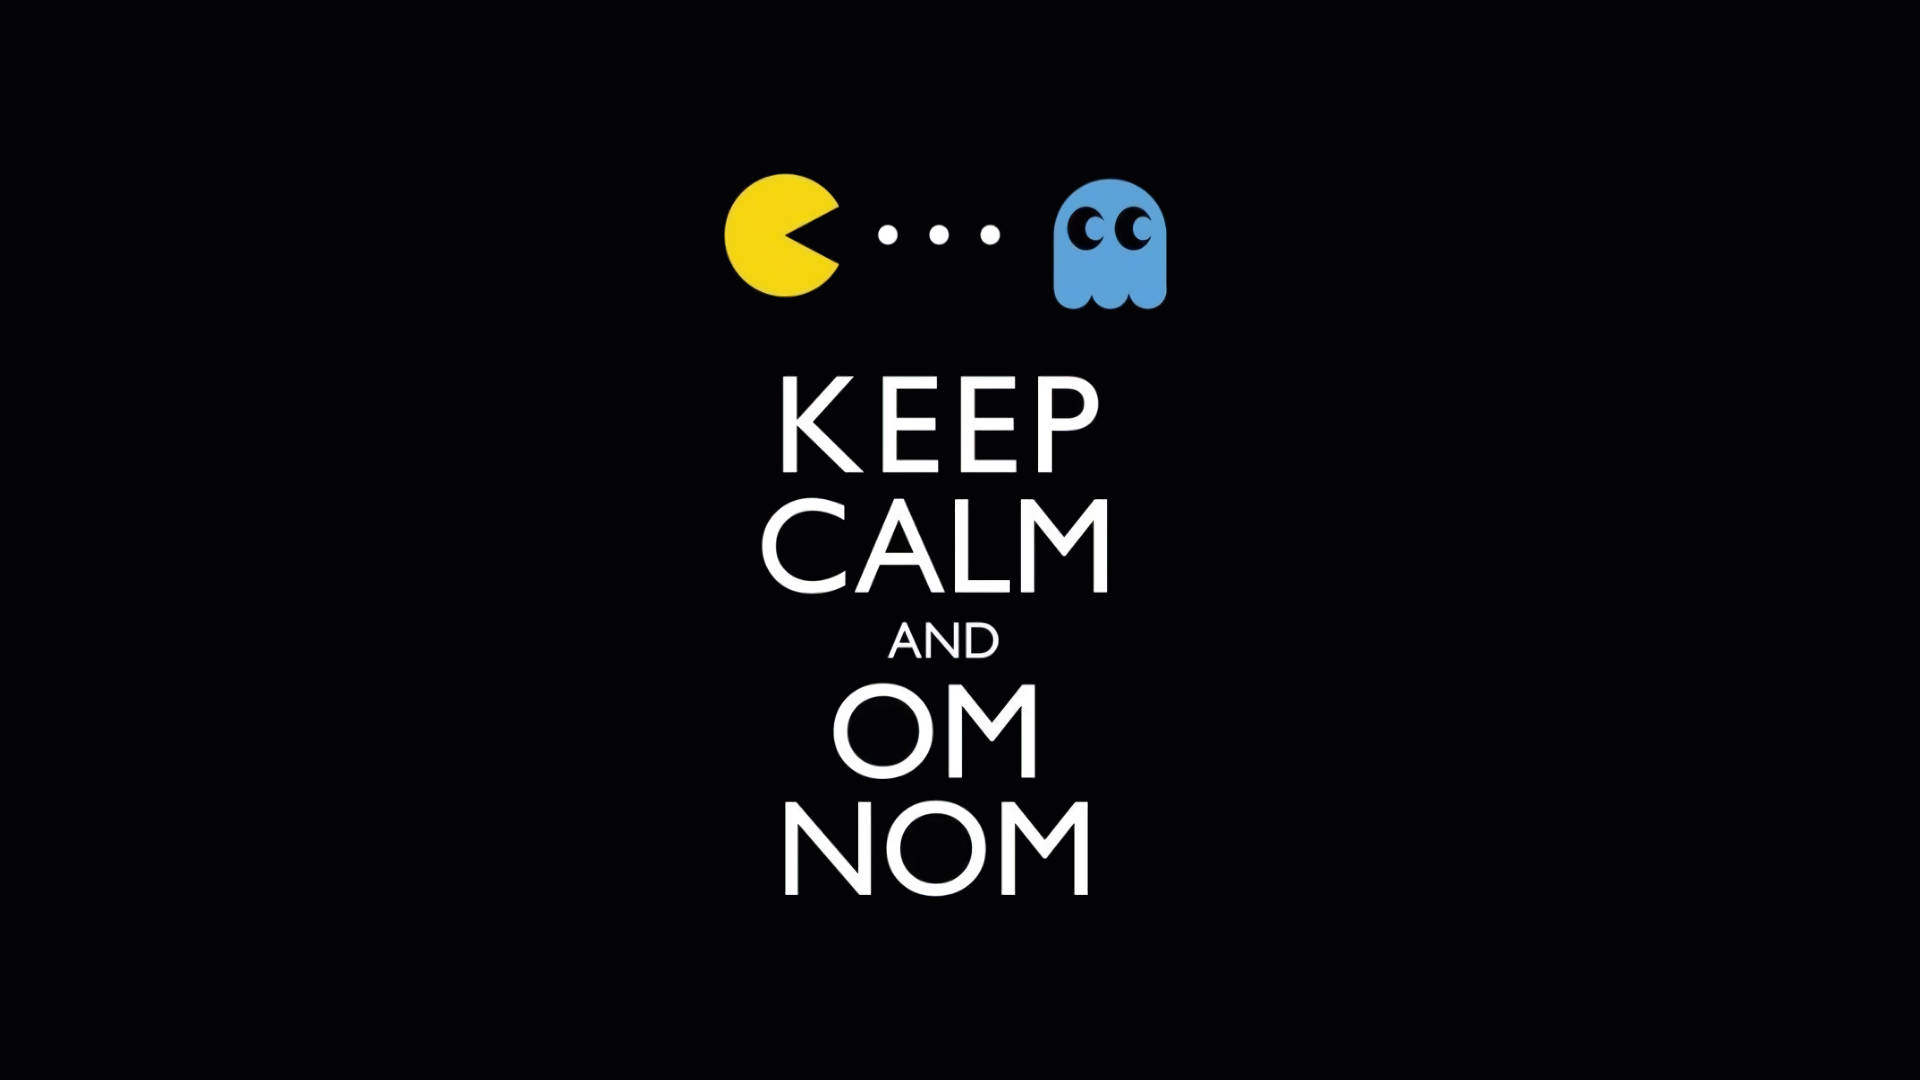 Keep Calm And Om Nom Iphone